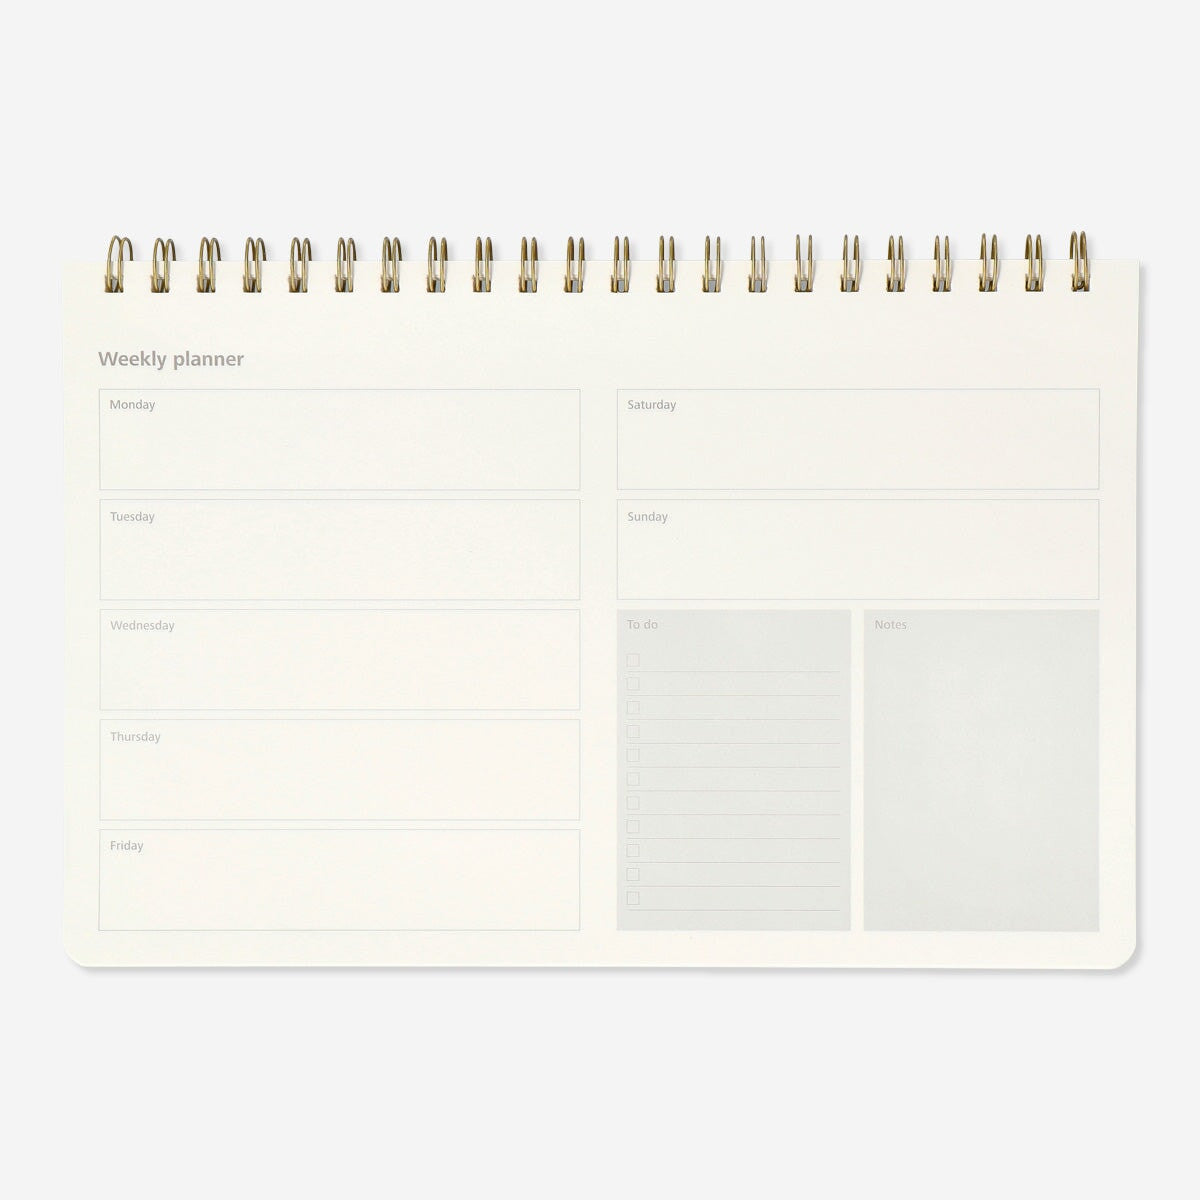 Image of Weekly planner